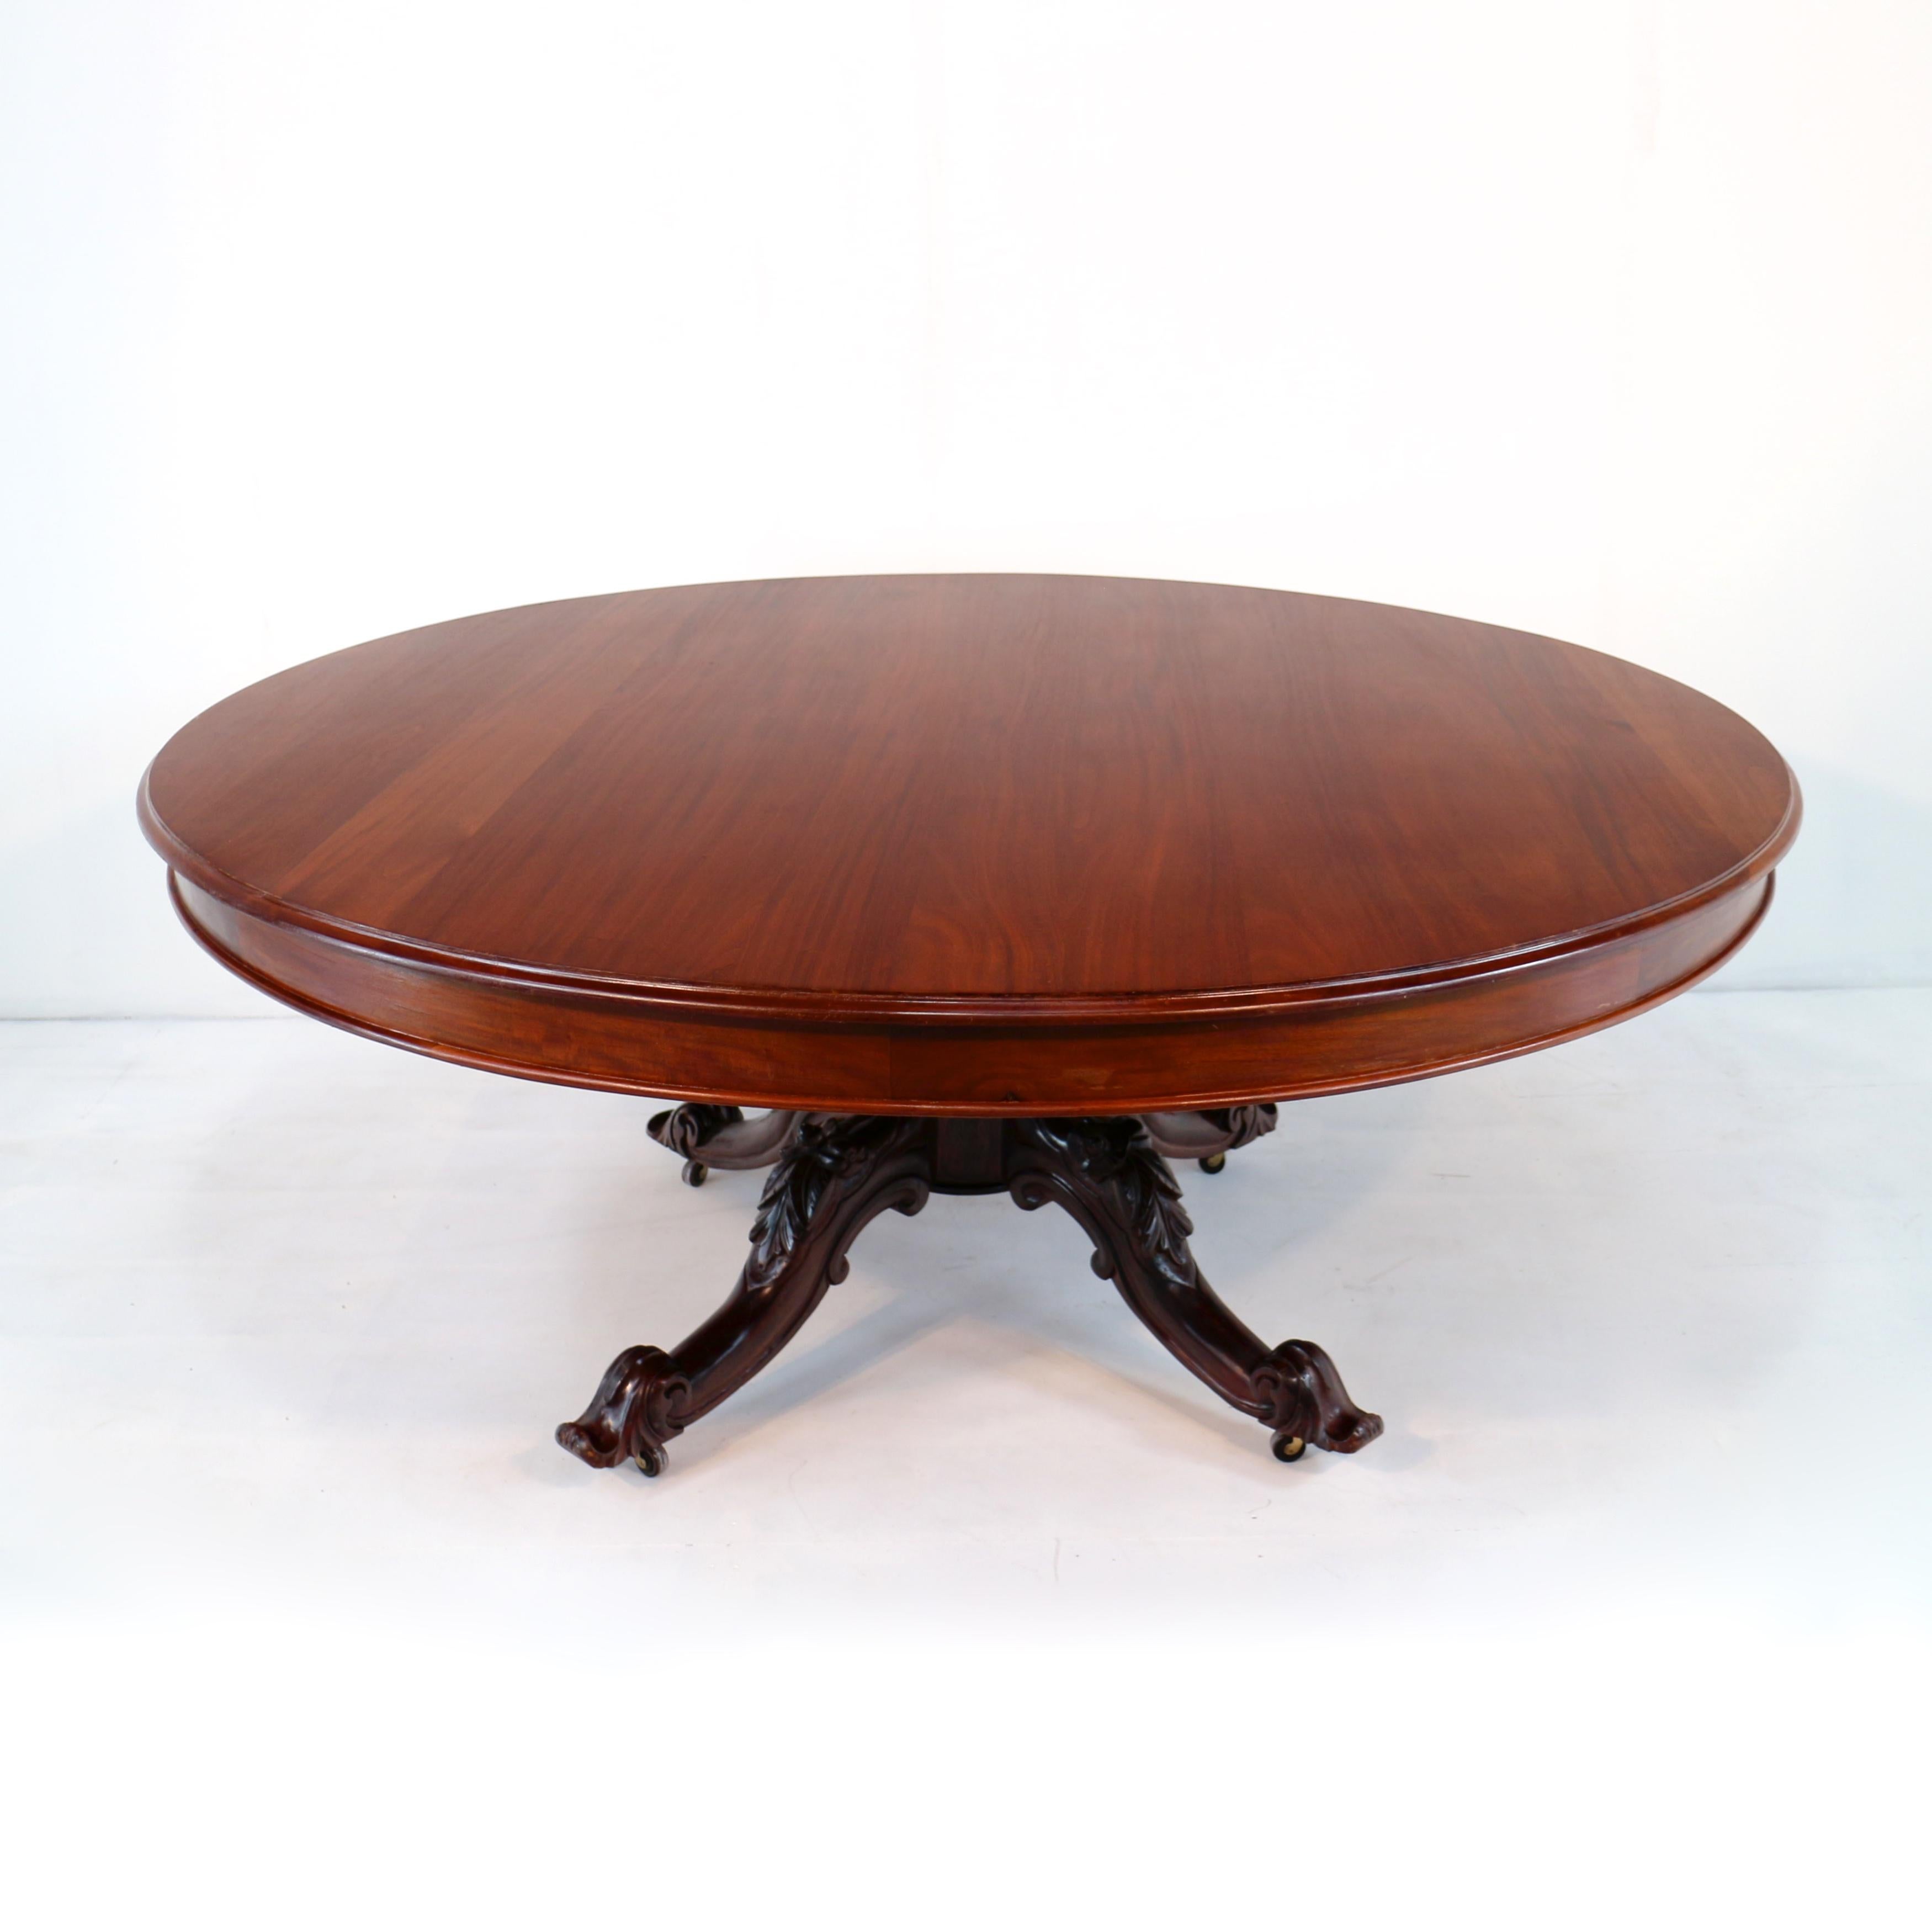 British Large Victorian Style Mahogany Circular Centre Table - 6ft7 / 2m diameter For Sale